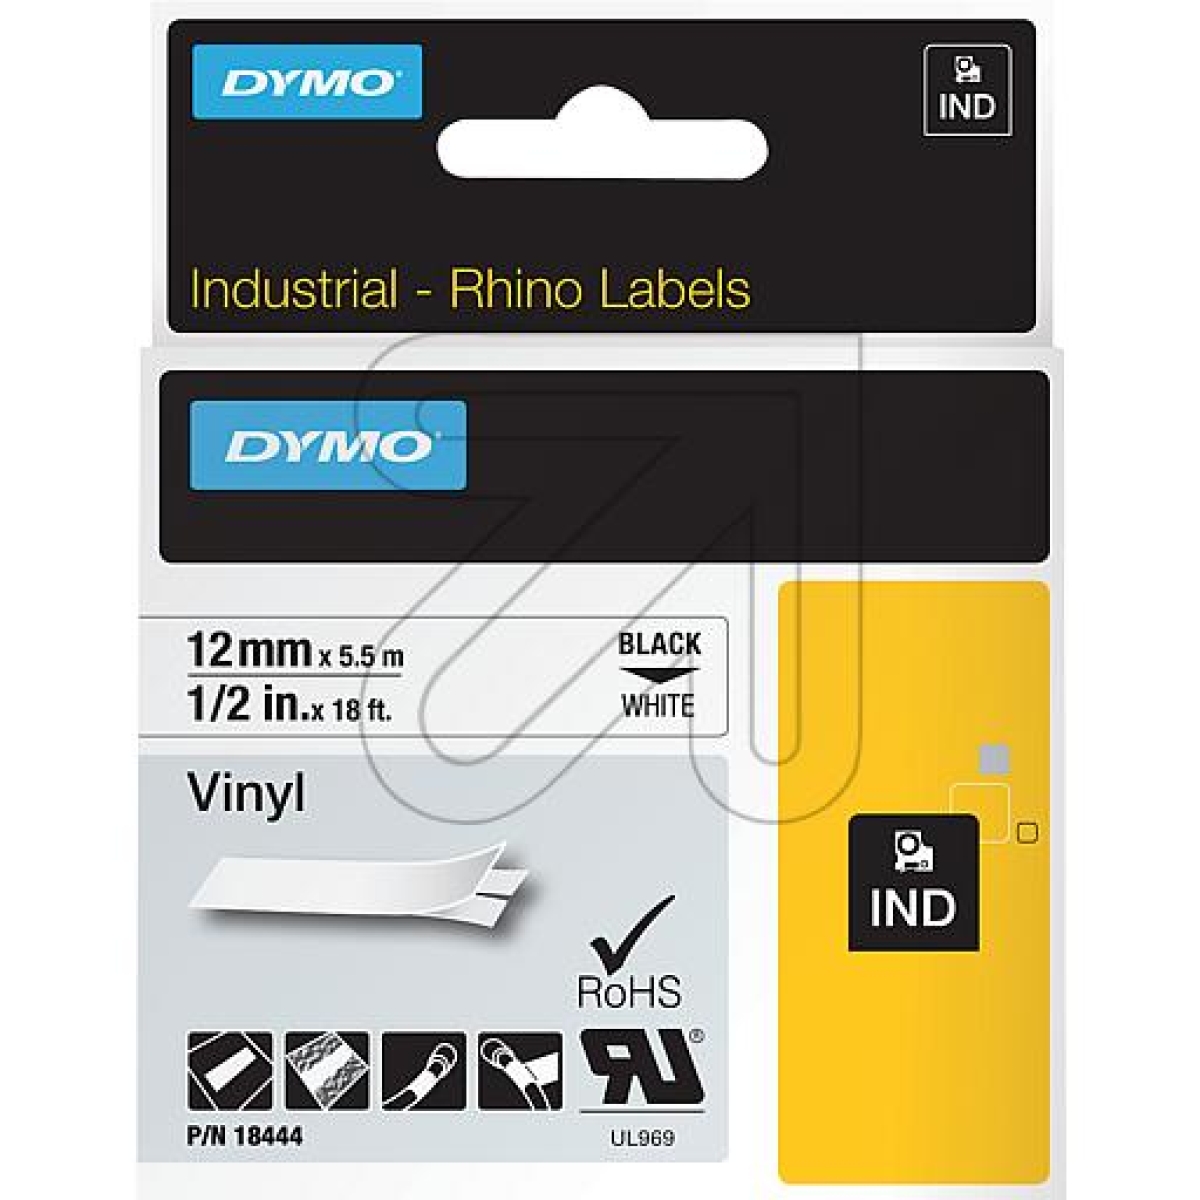 DYMOindustrial tape IND-Vinyl, W12mm 18444 - black on whiteArticle-No: 757165